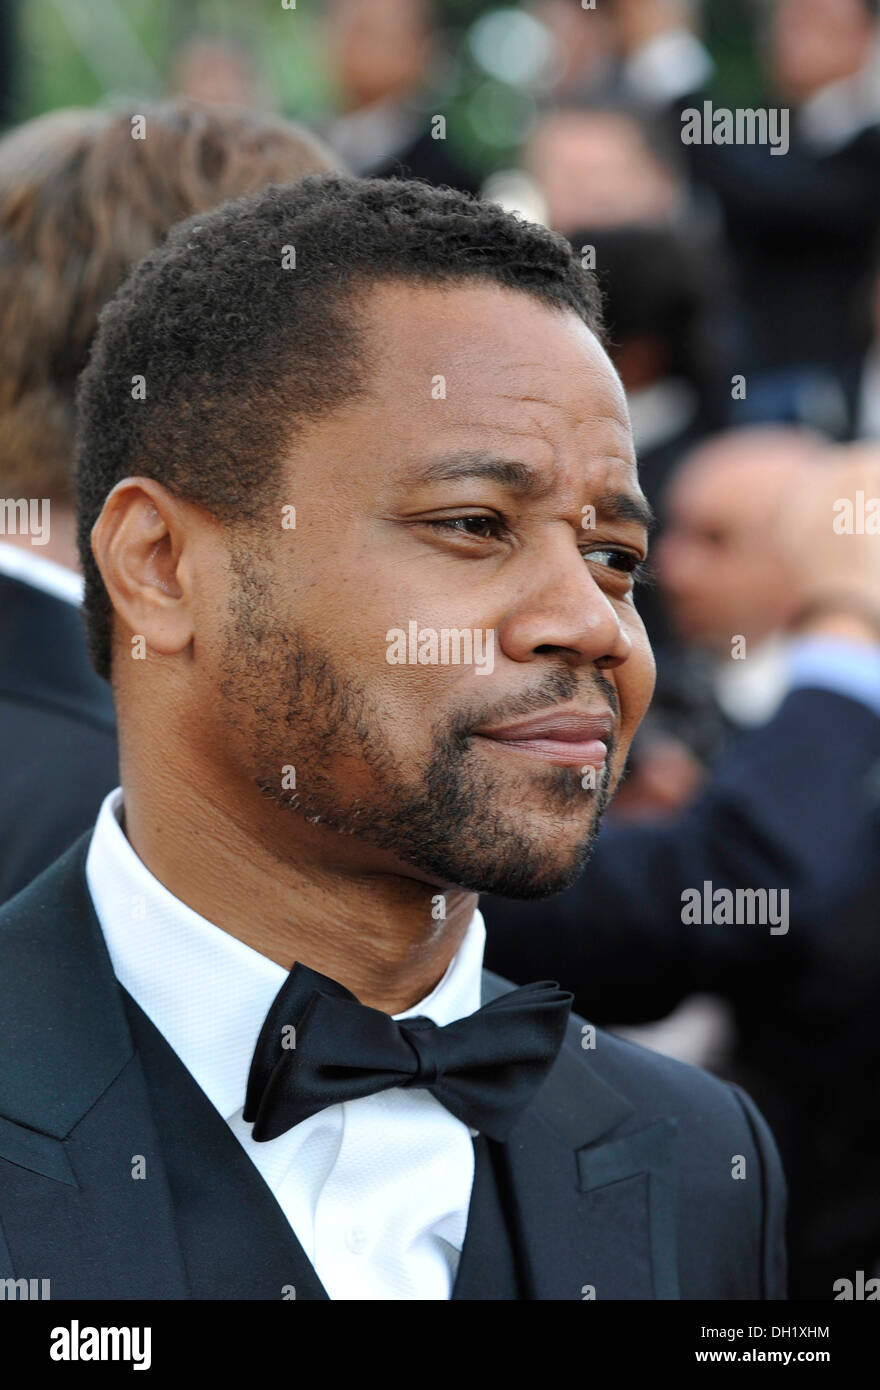 Cannes International Film Festival 2012: Cuba Gooding Jr attending the screening of the film "The Paperboy" on 2012.05.24 Stock Photo